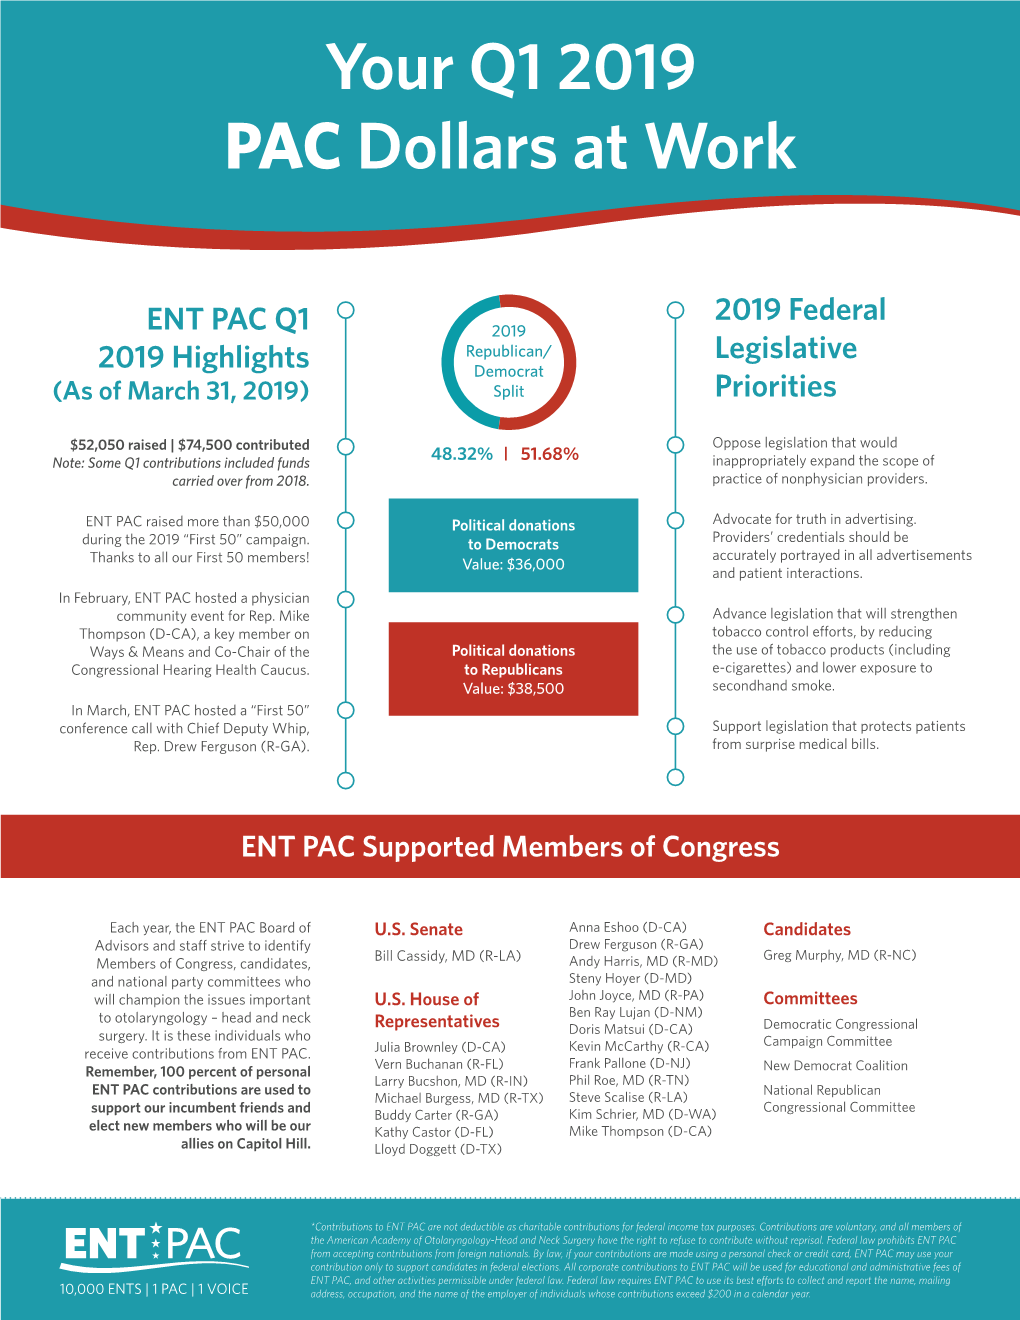 Your Q1 2019 PAC Dollars at Work